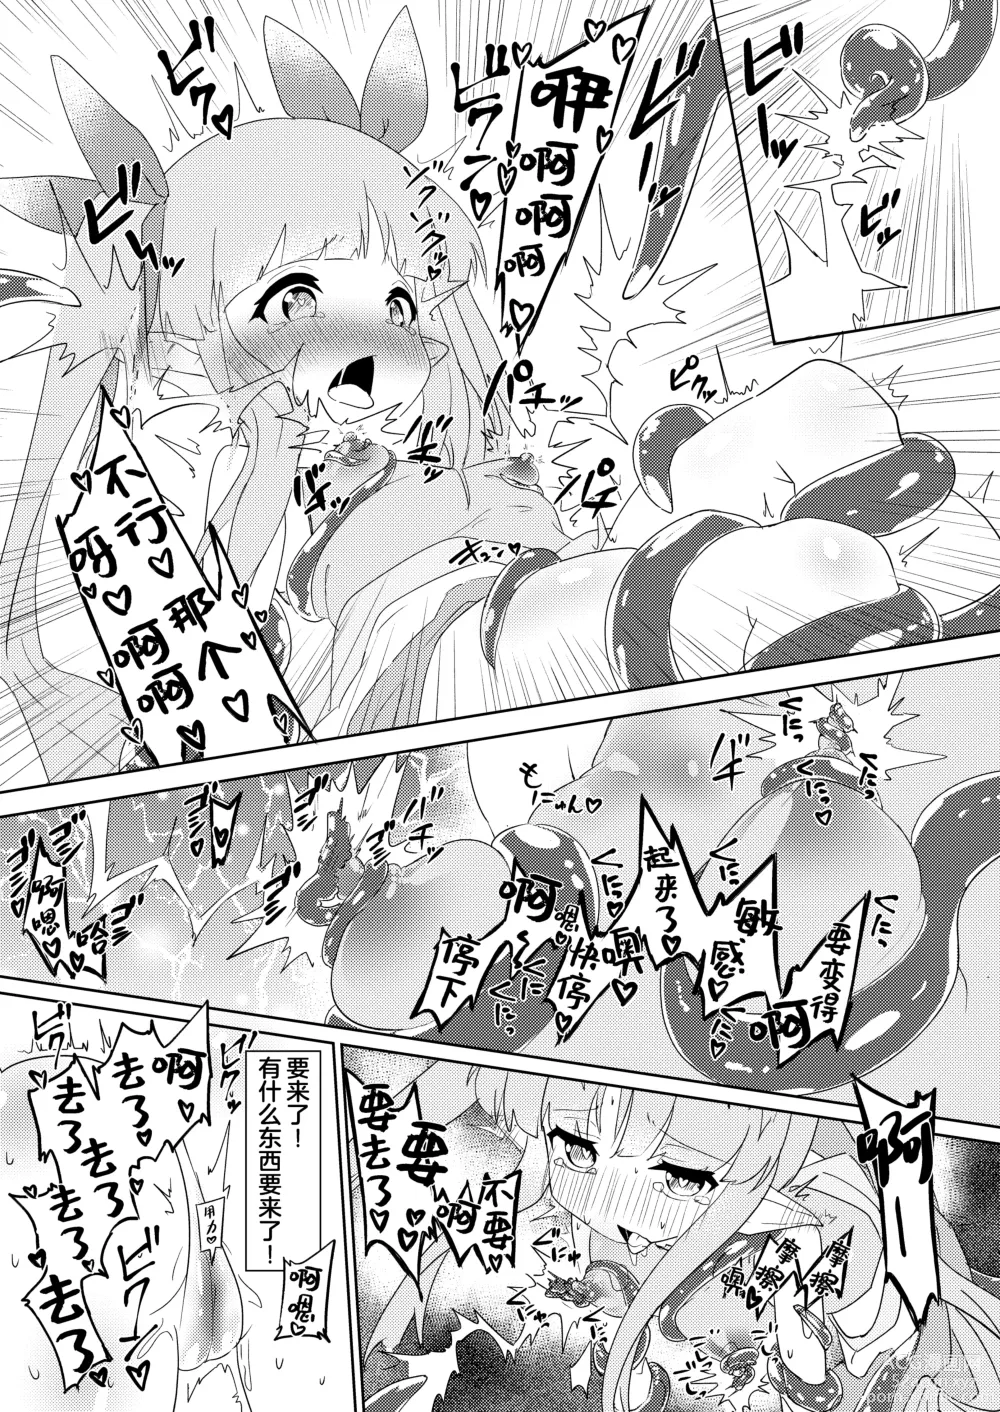 Page 12 of doujinshi Tentacle Defeat Little Lyrical Edition Prototype